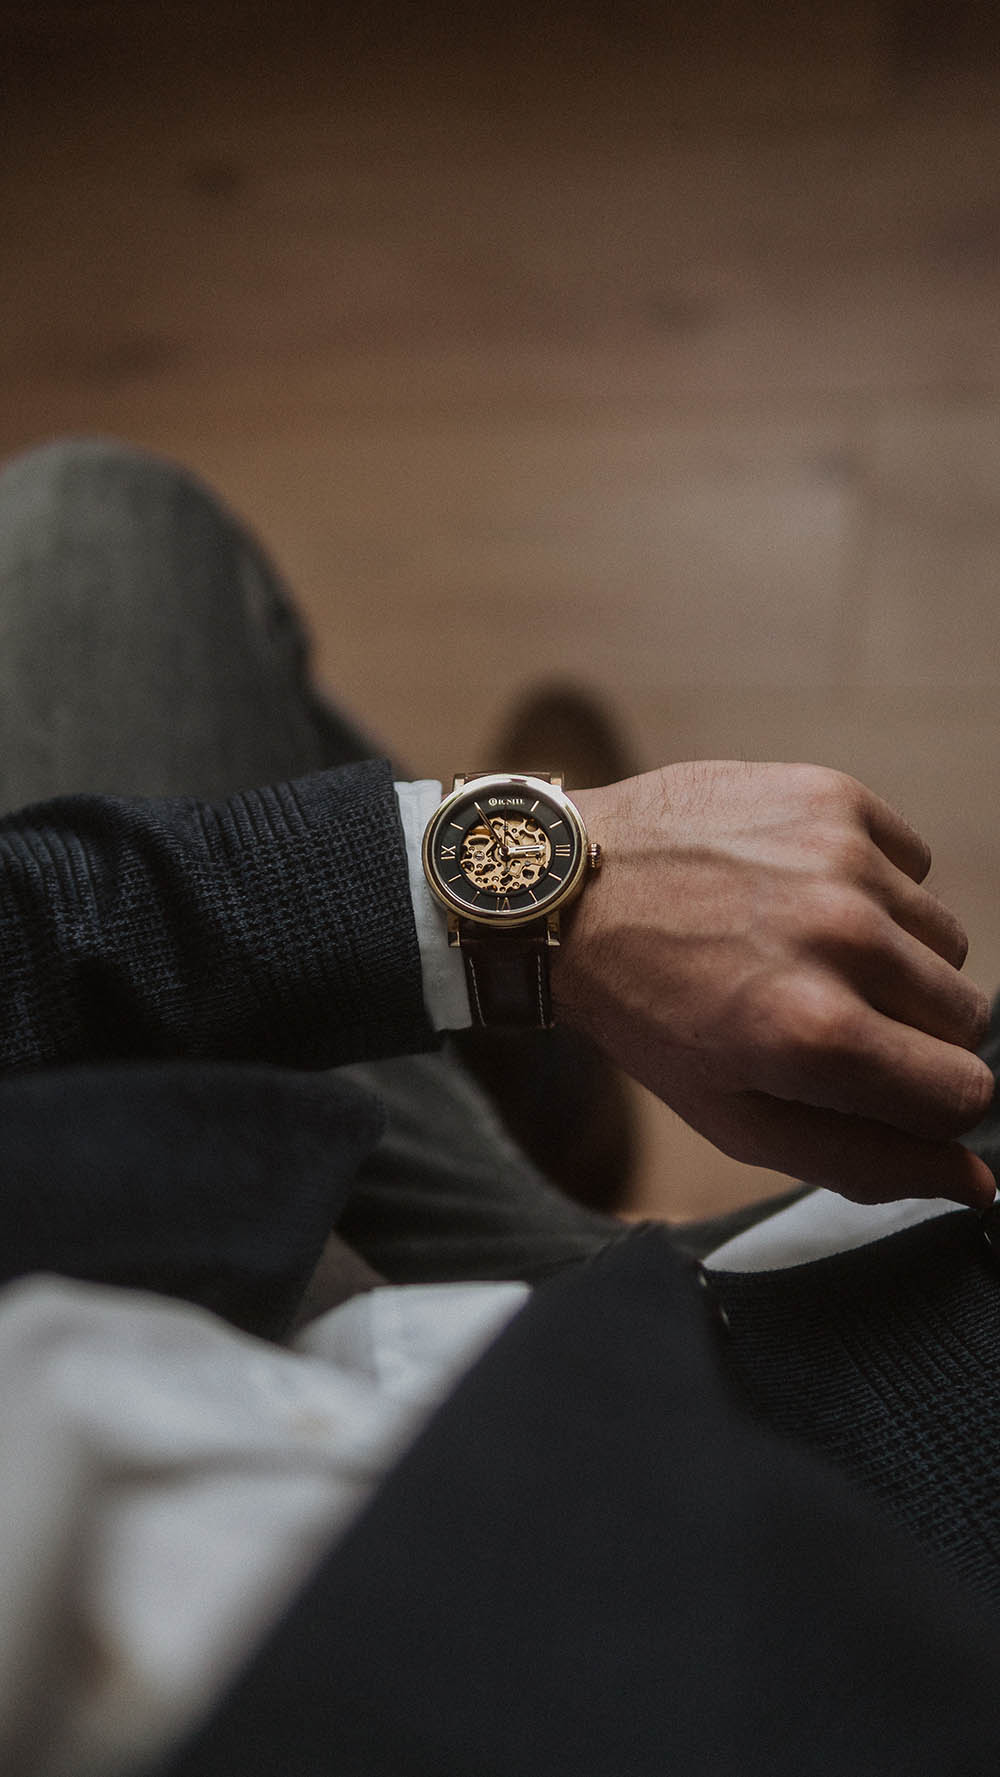 Fossil Q x Cory Richards hands-on: Stylish high quality watch and